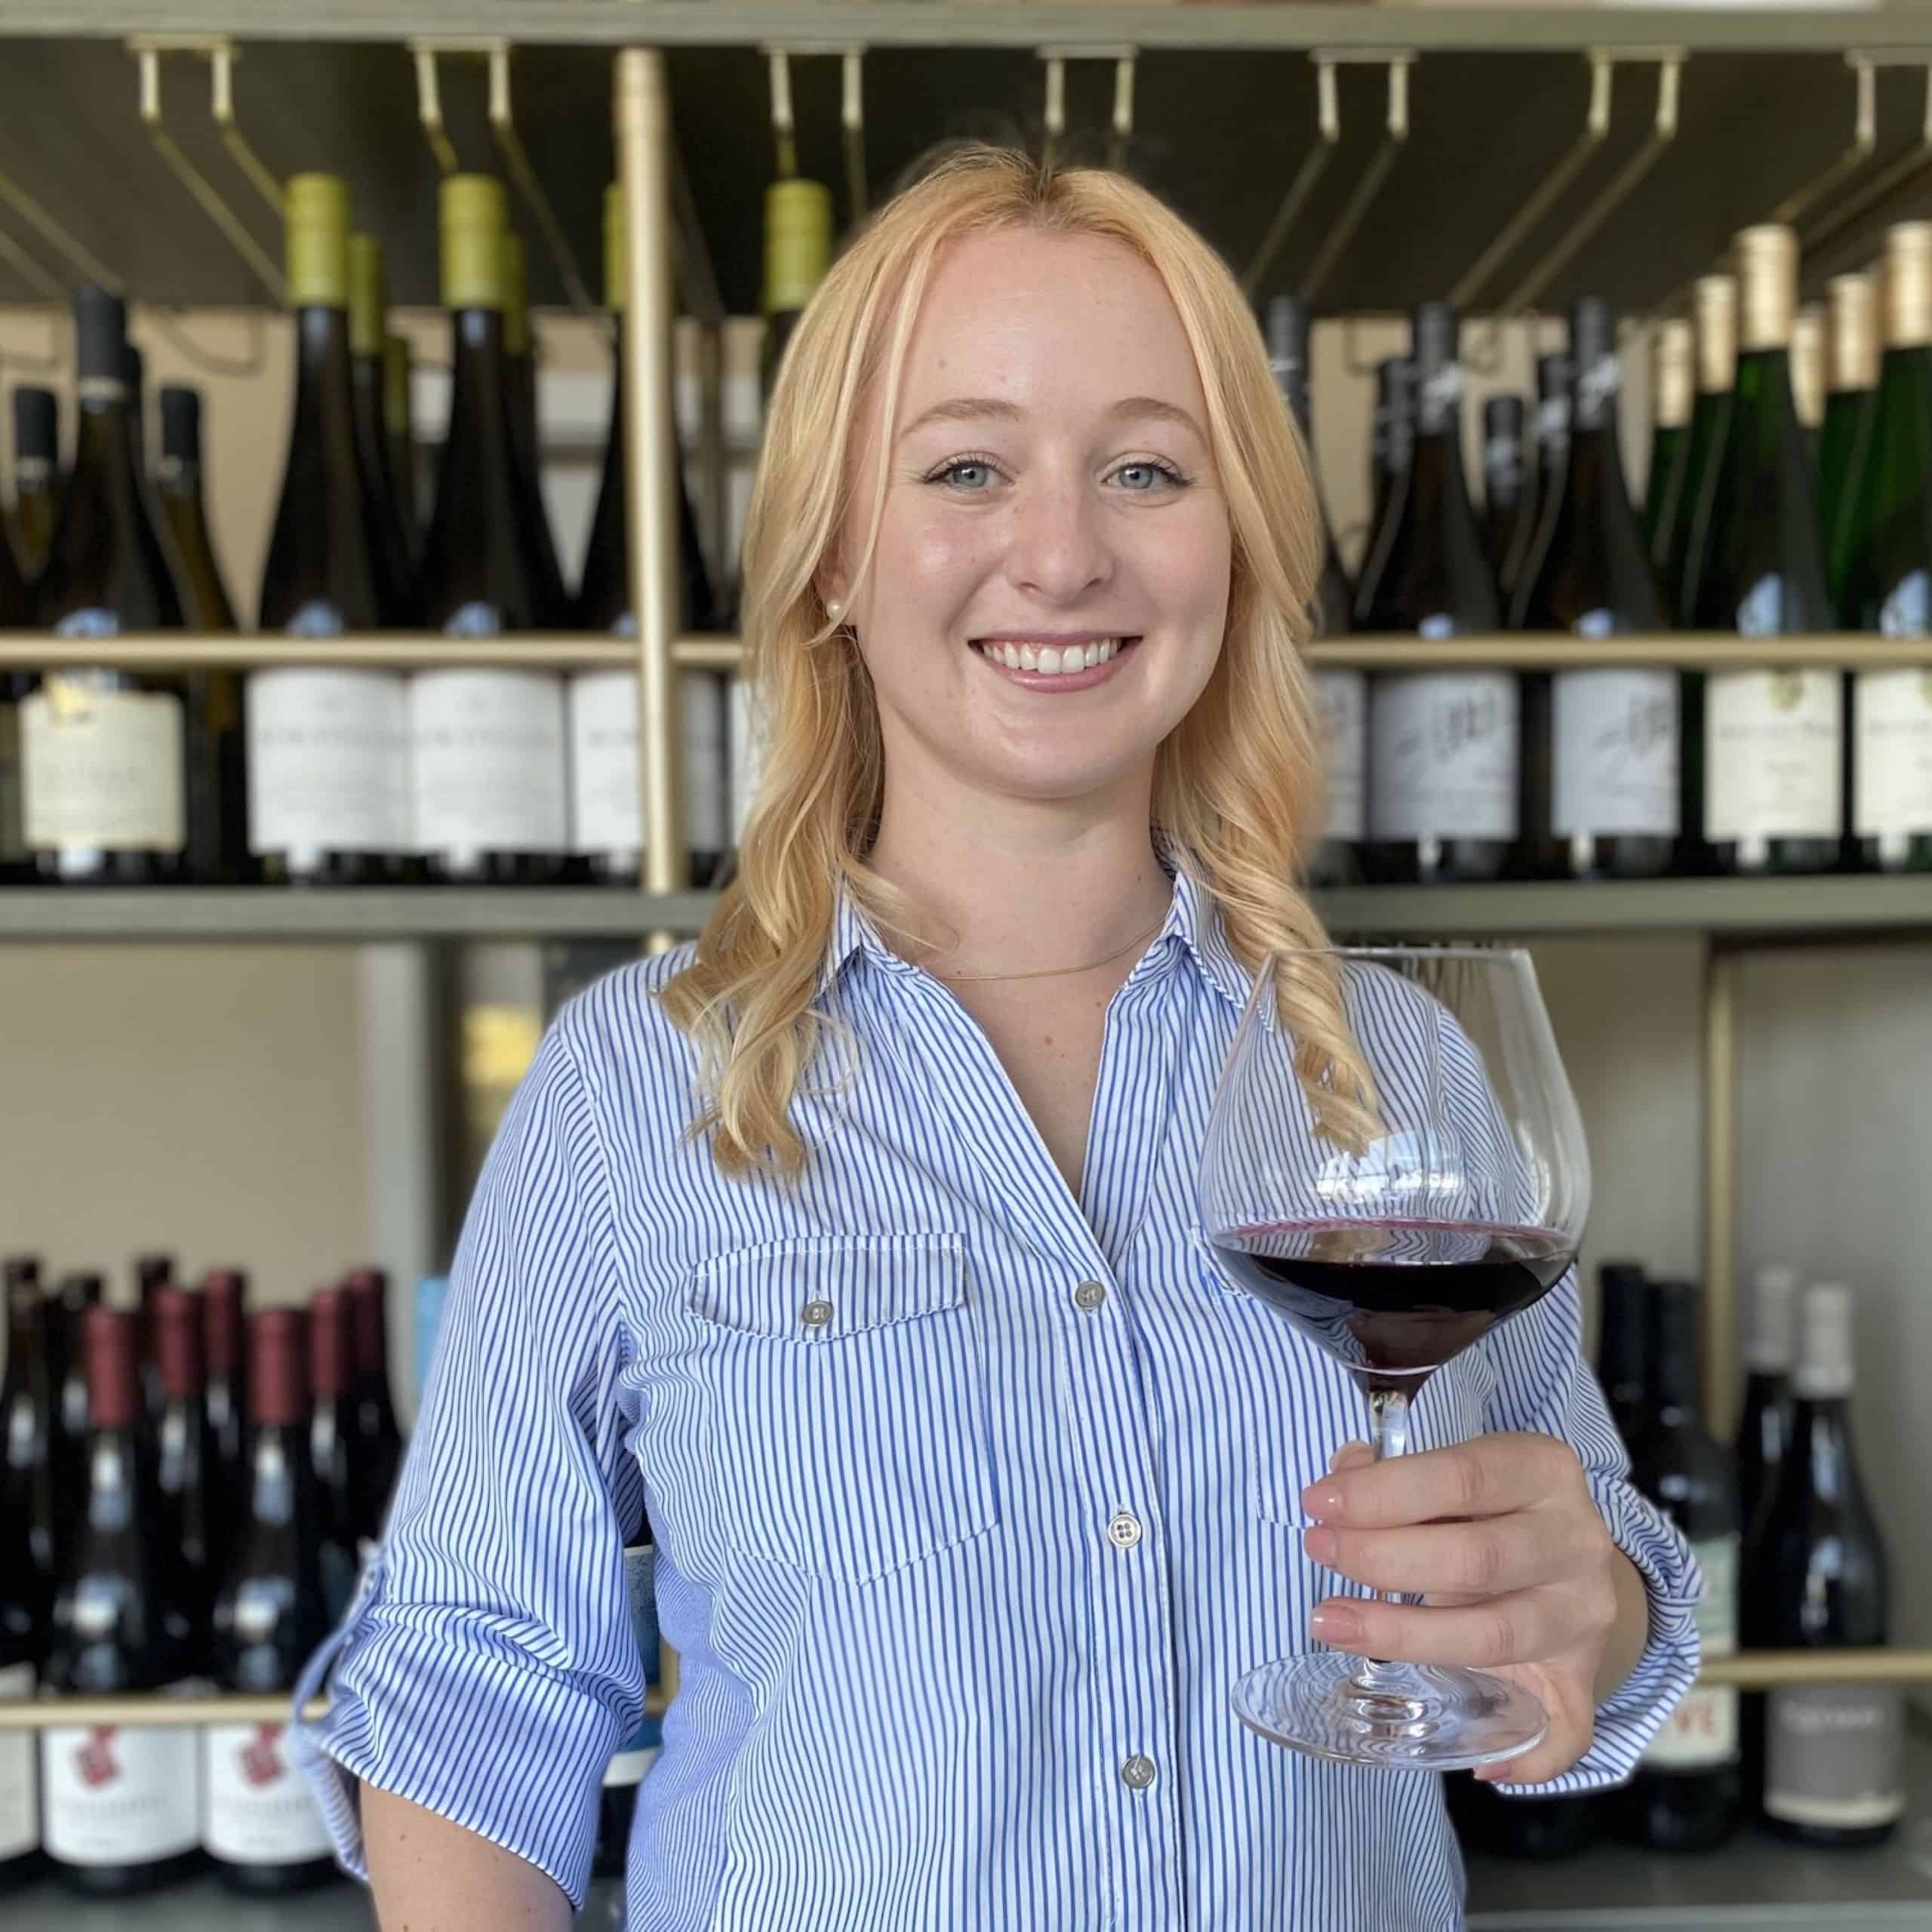 Jenna Isaacs standing in front of a wine rack and holding a glass of red wine